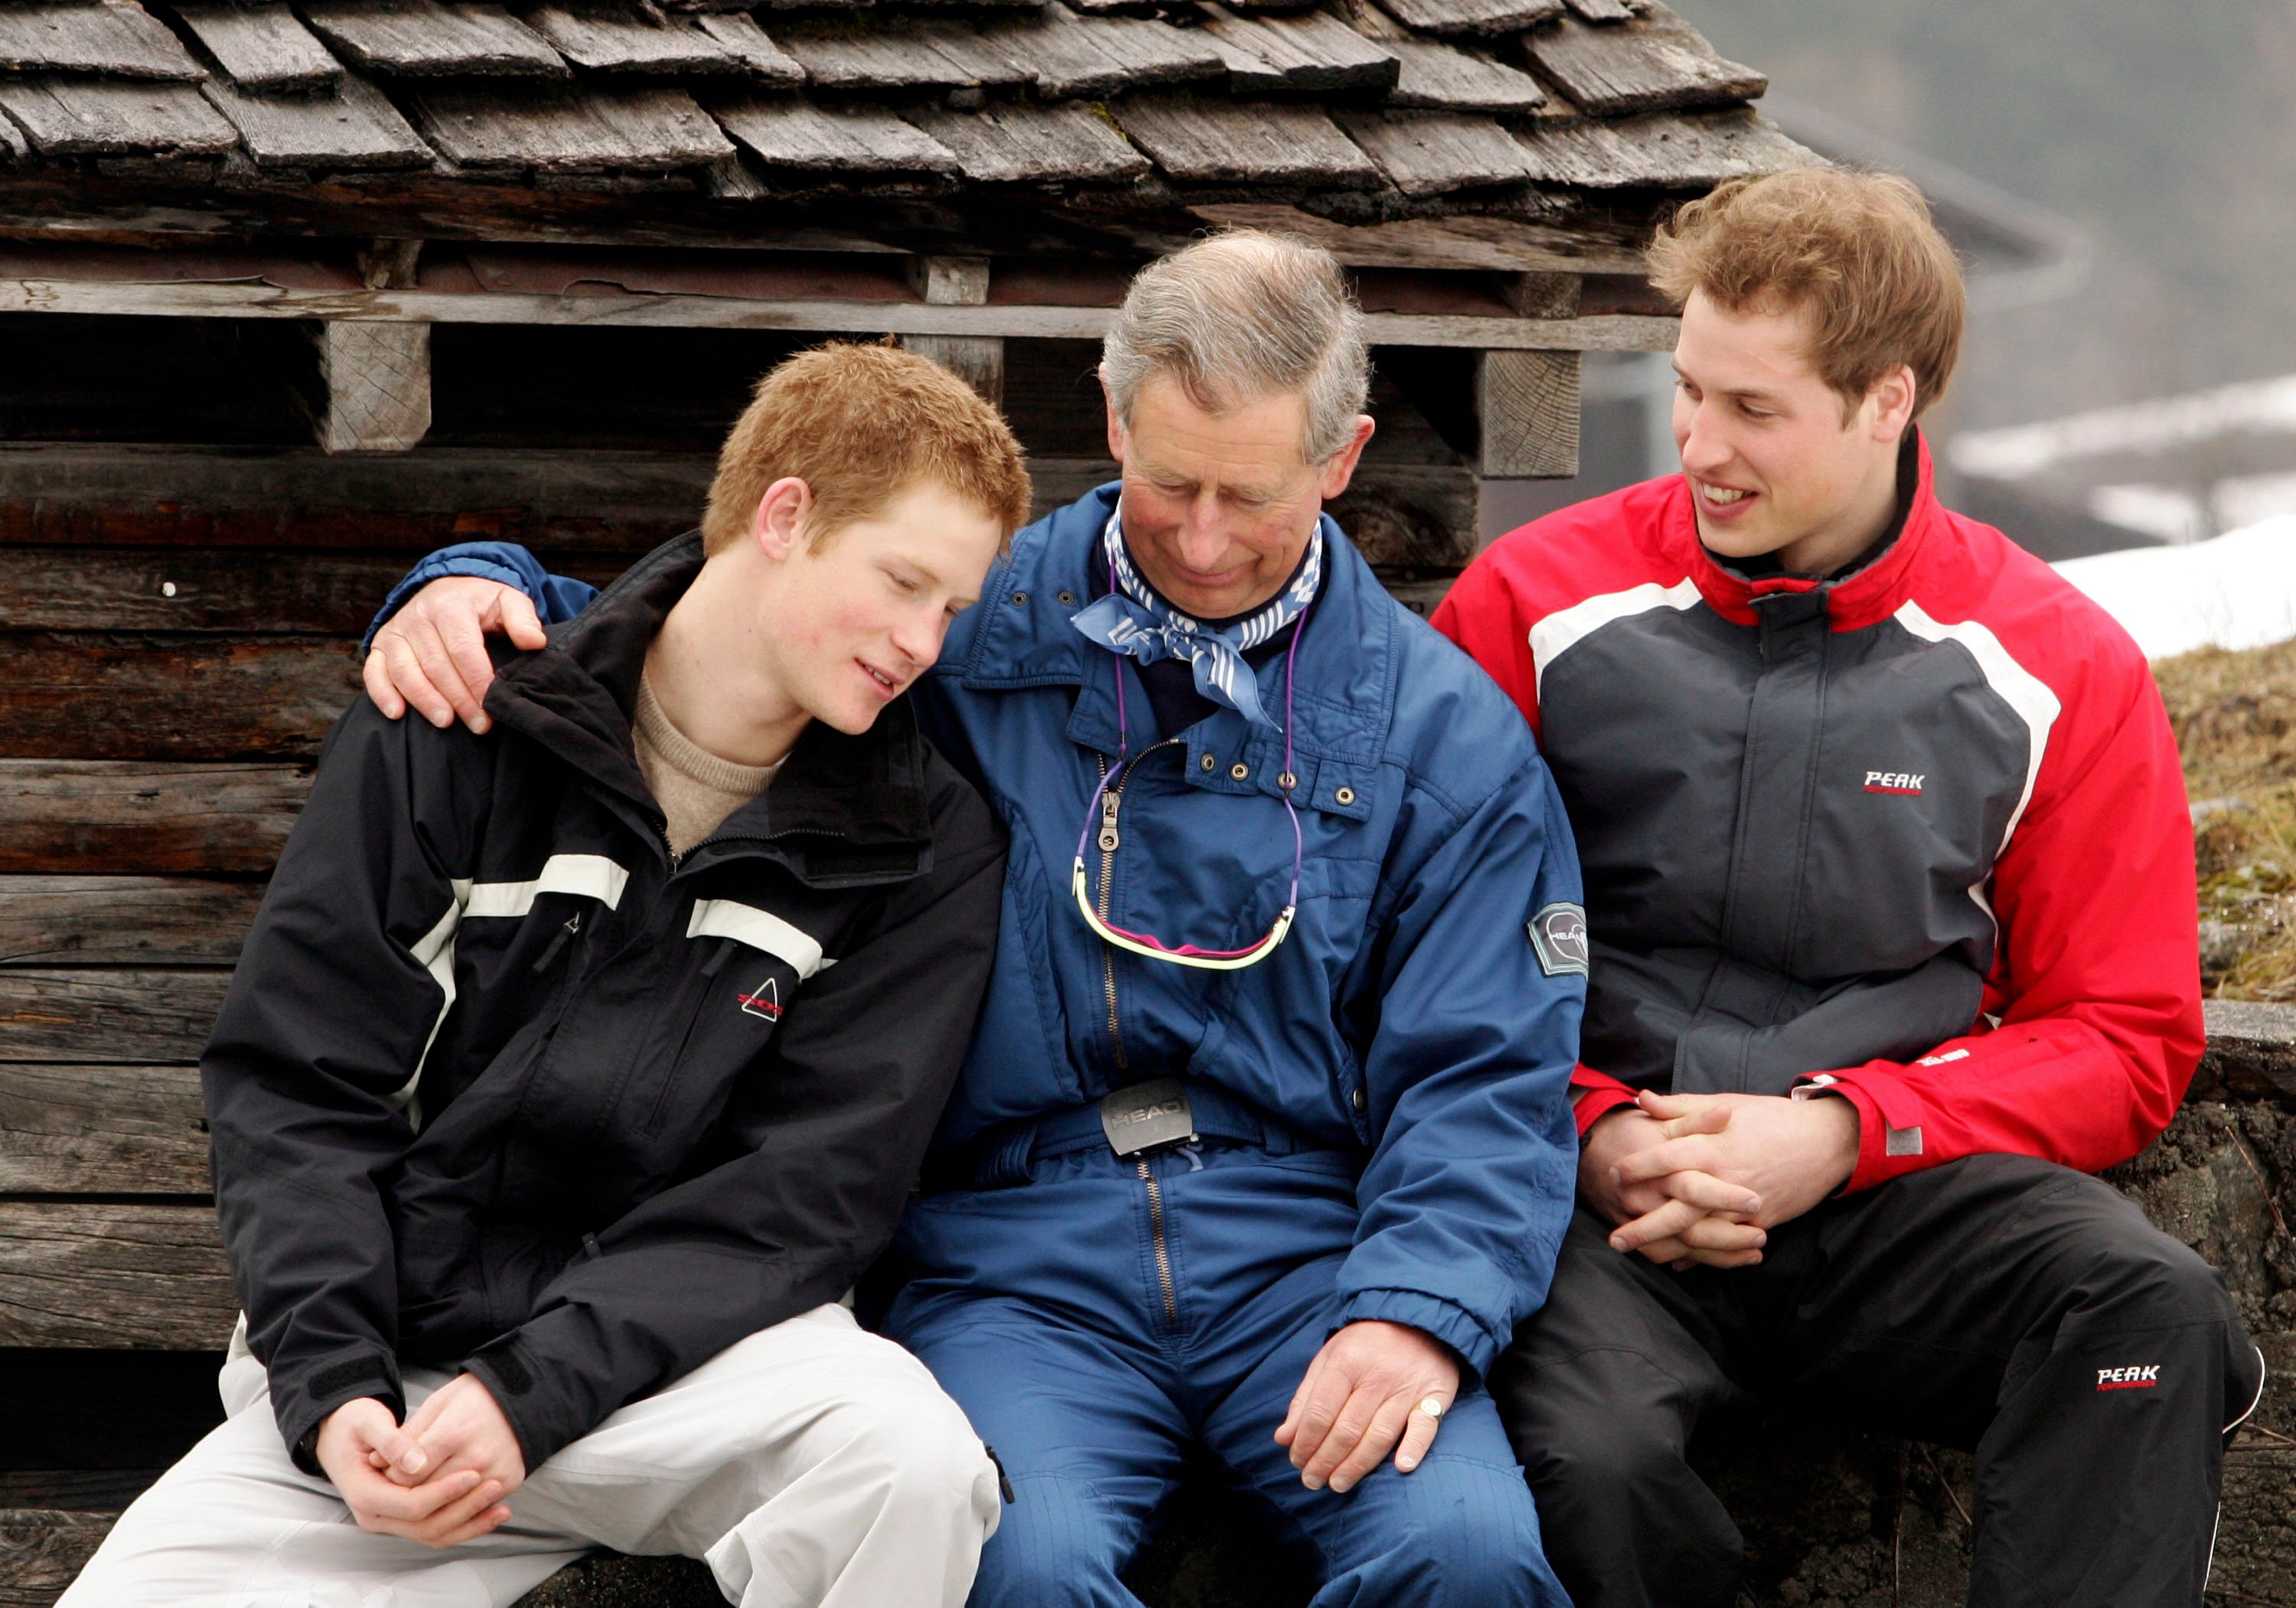 Then-Prince Charles poses with his sons Prince William and Prince Harry during the Royal Family's ski break at Klosters